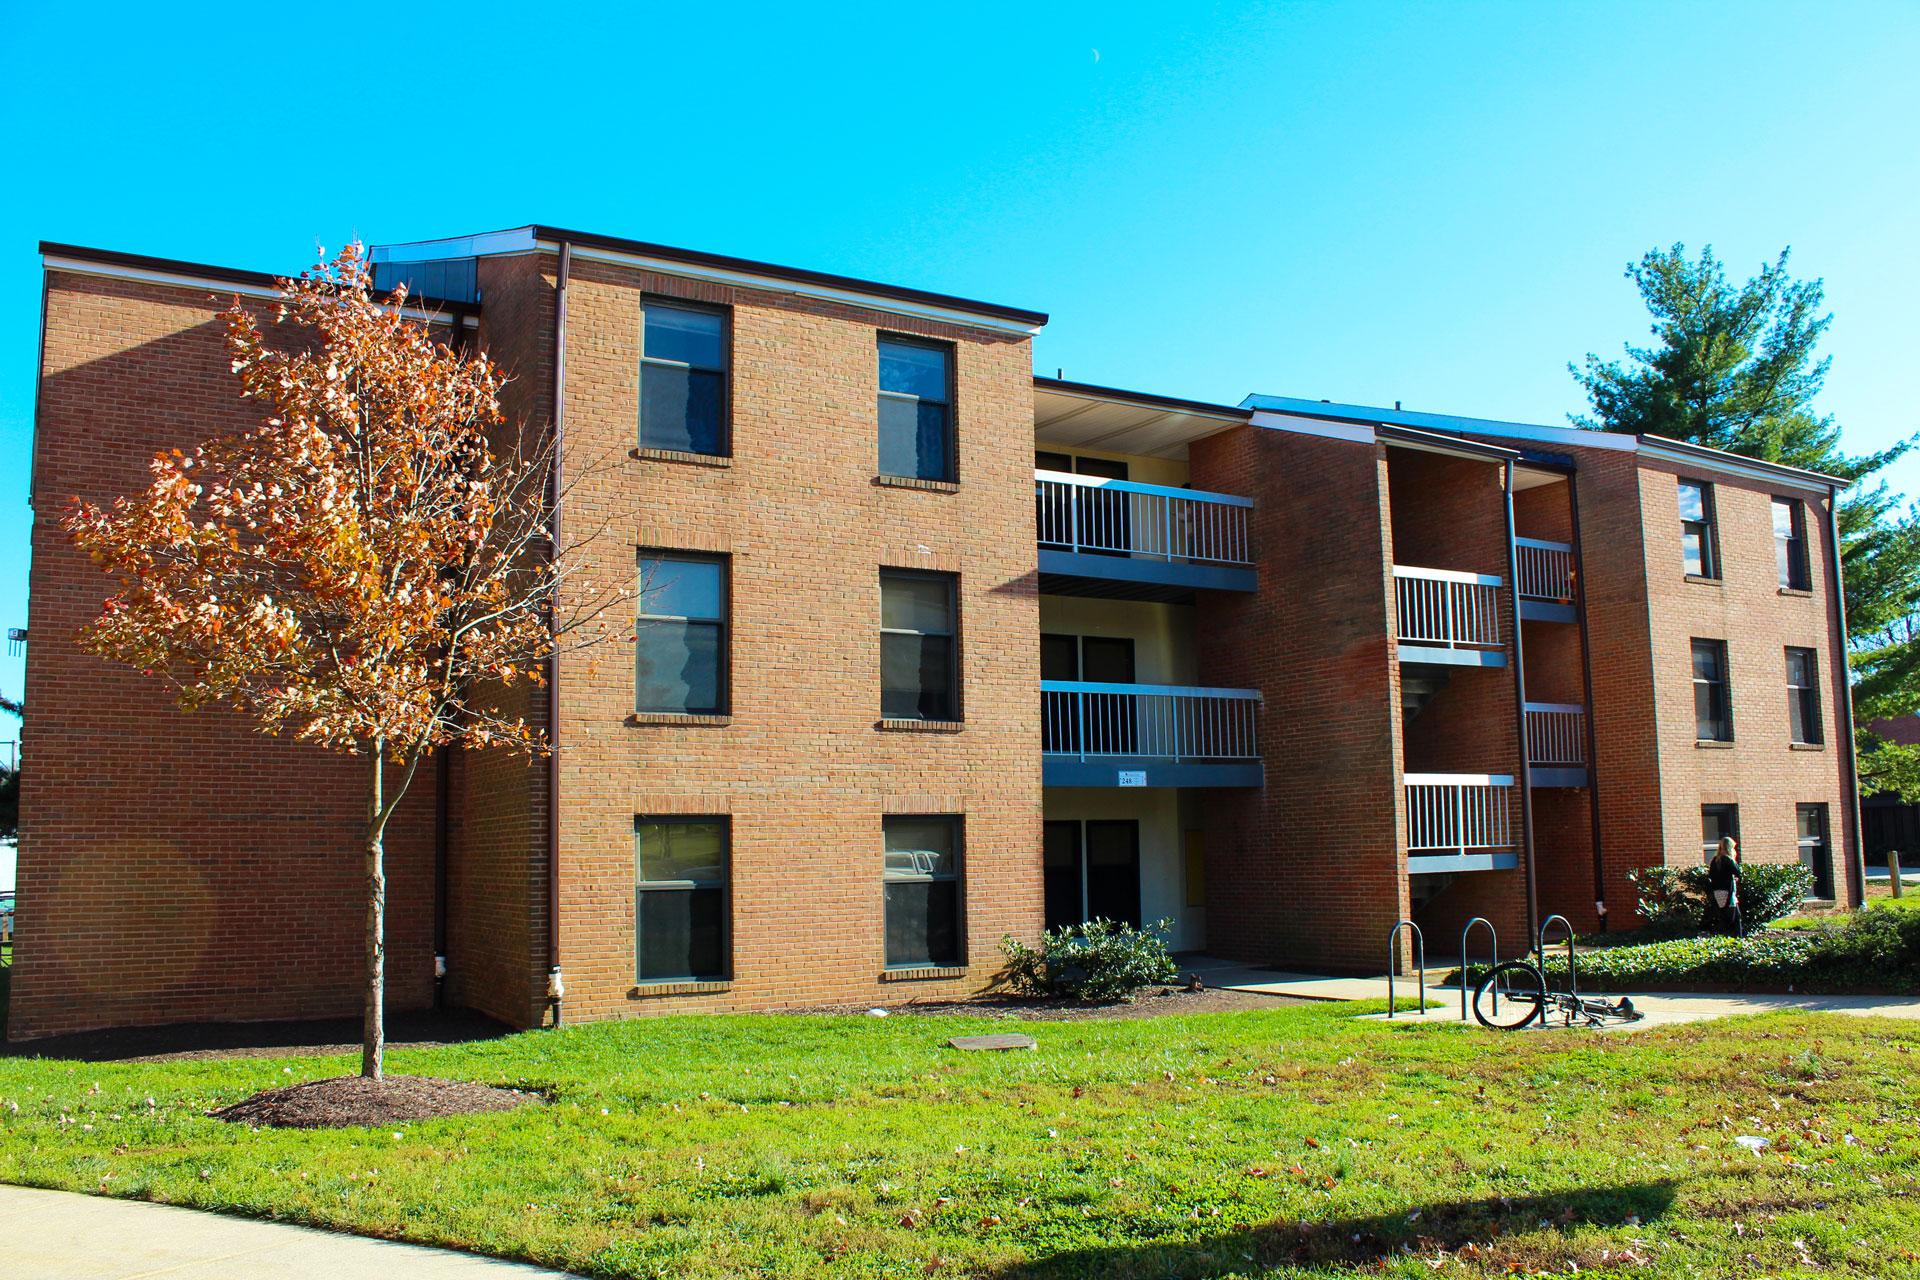 exterior view of Leonardtown apartment complex on a sunny day